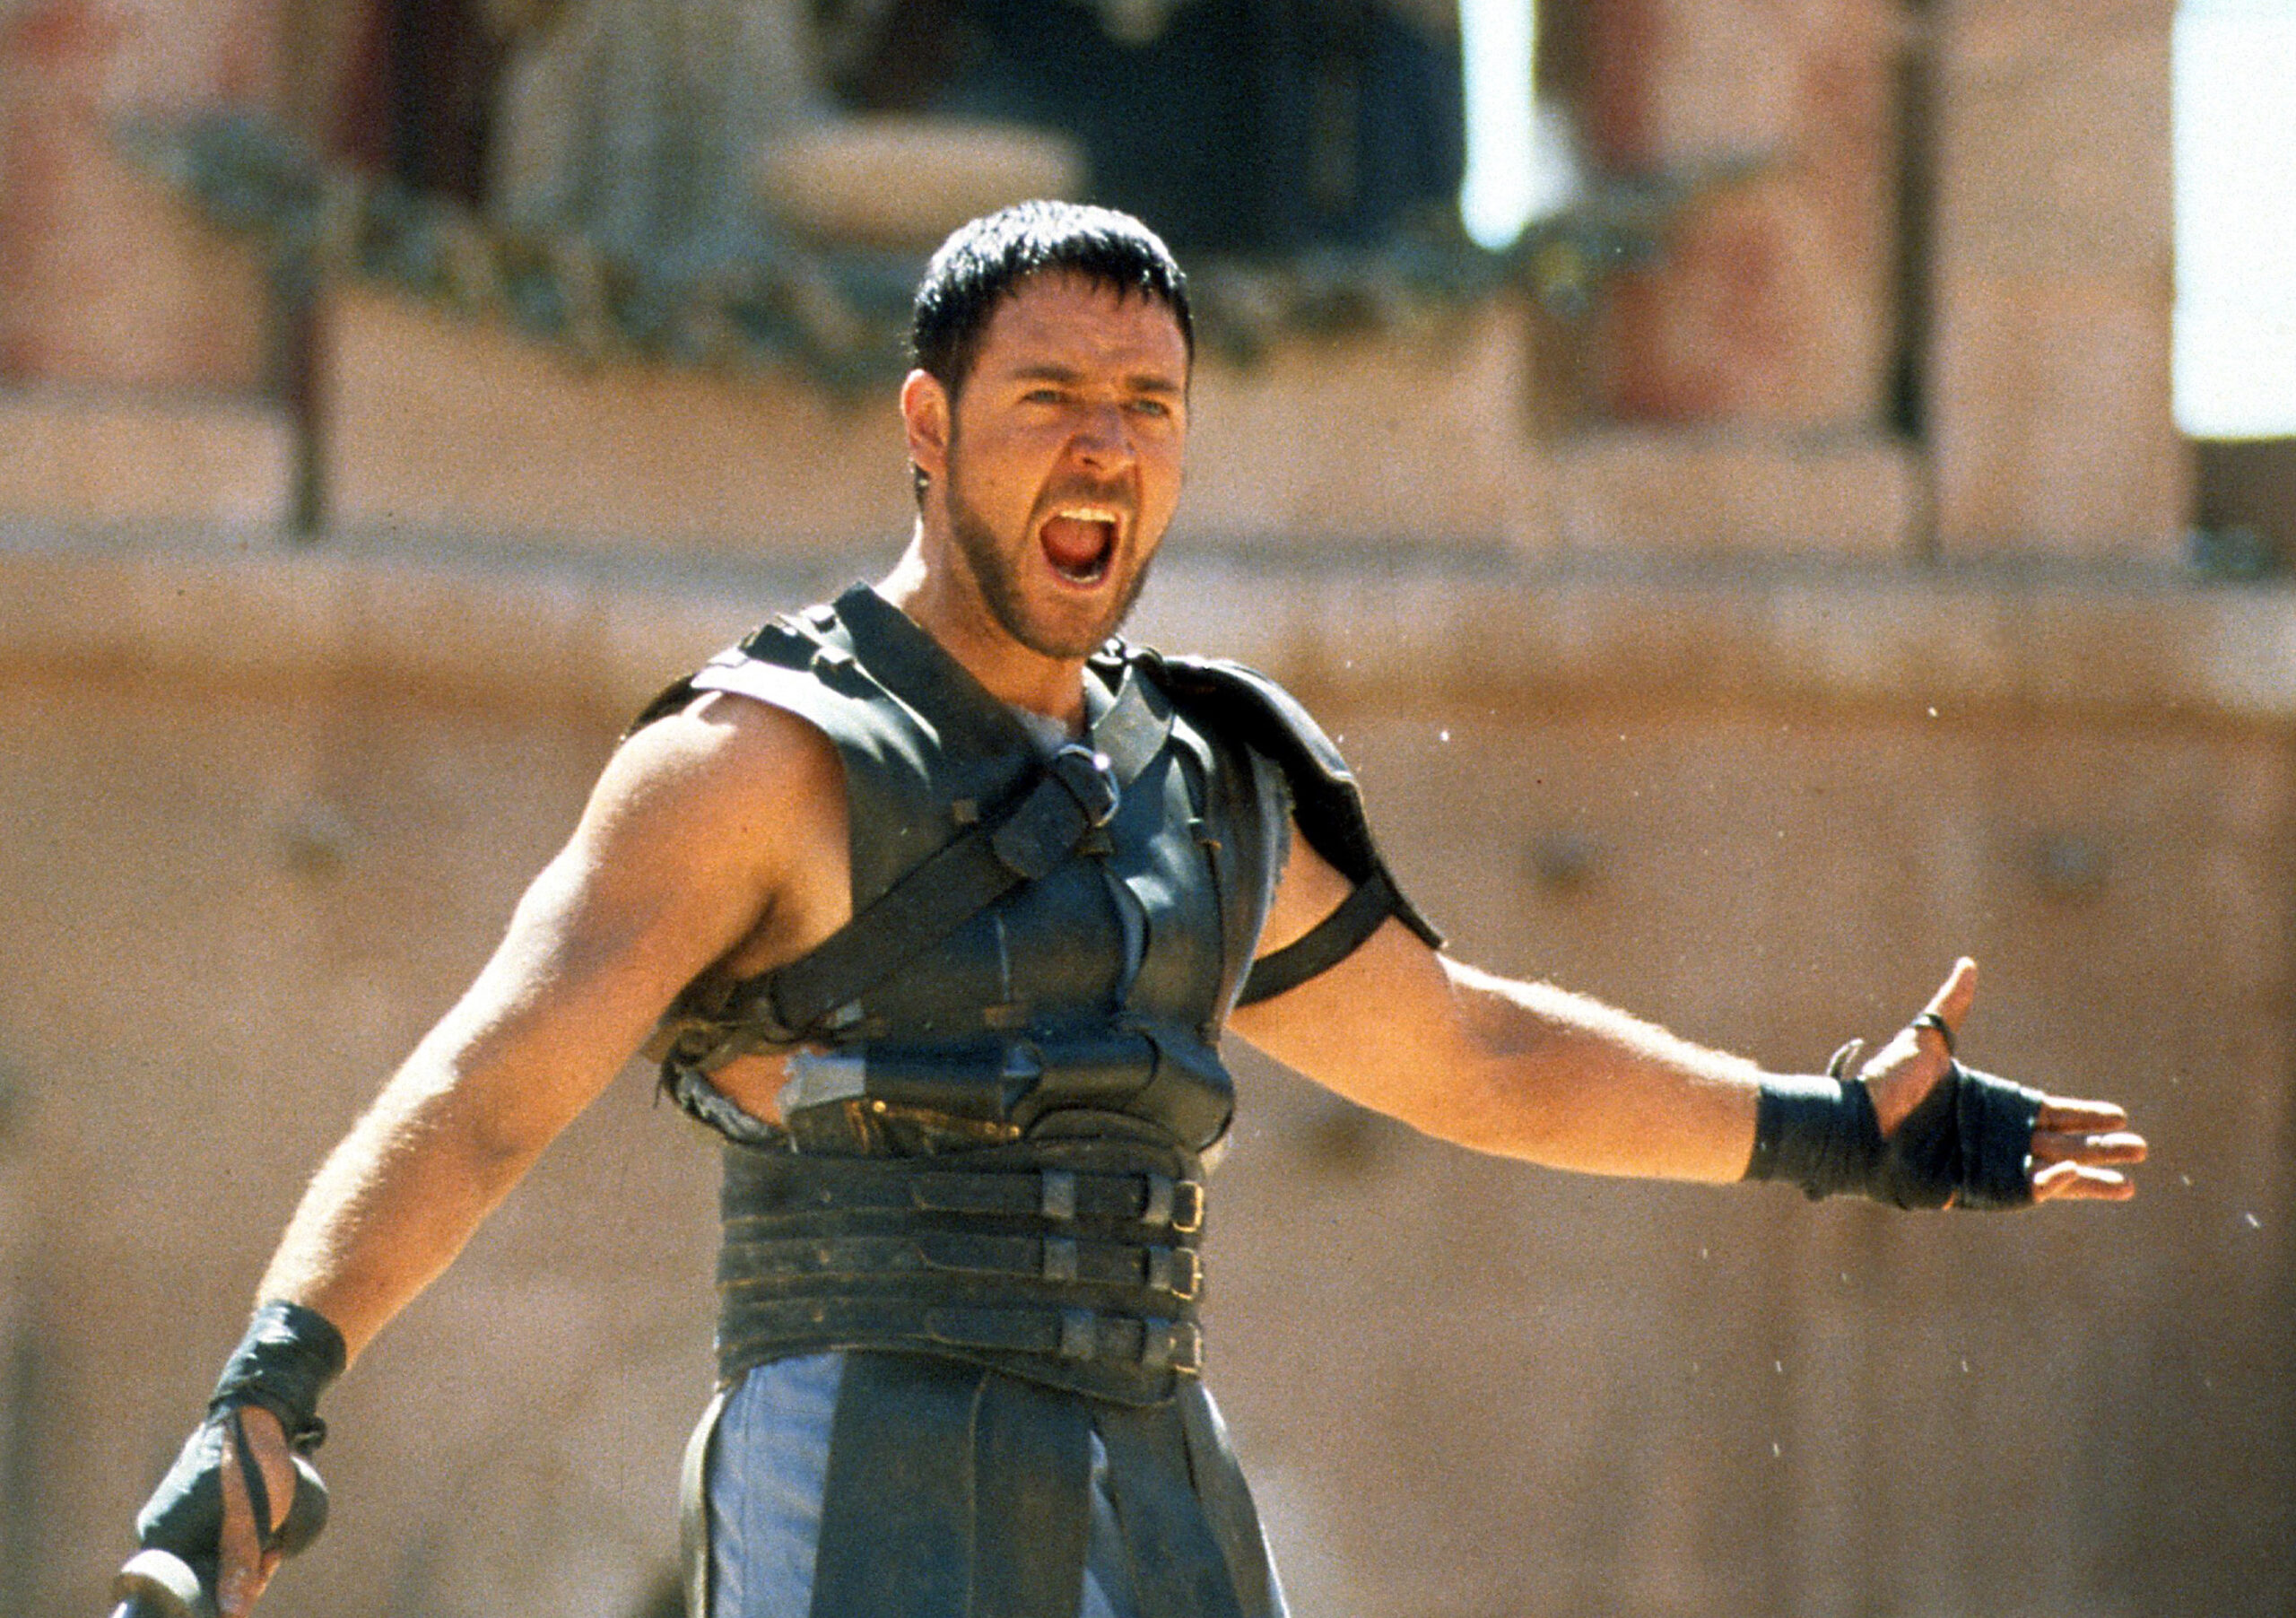 Russell Crowe Said He Almost Quit ‘Gladiator’ Due To ‘Absolute Rubbish’ Script